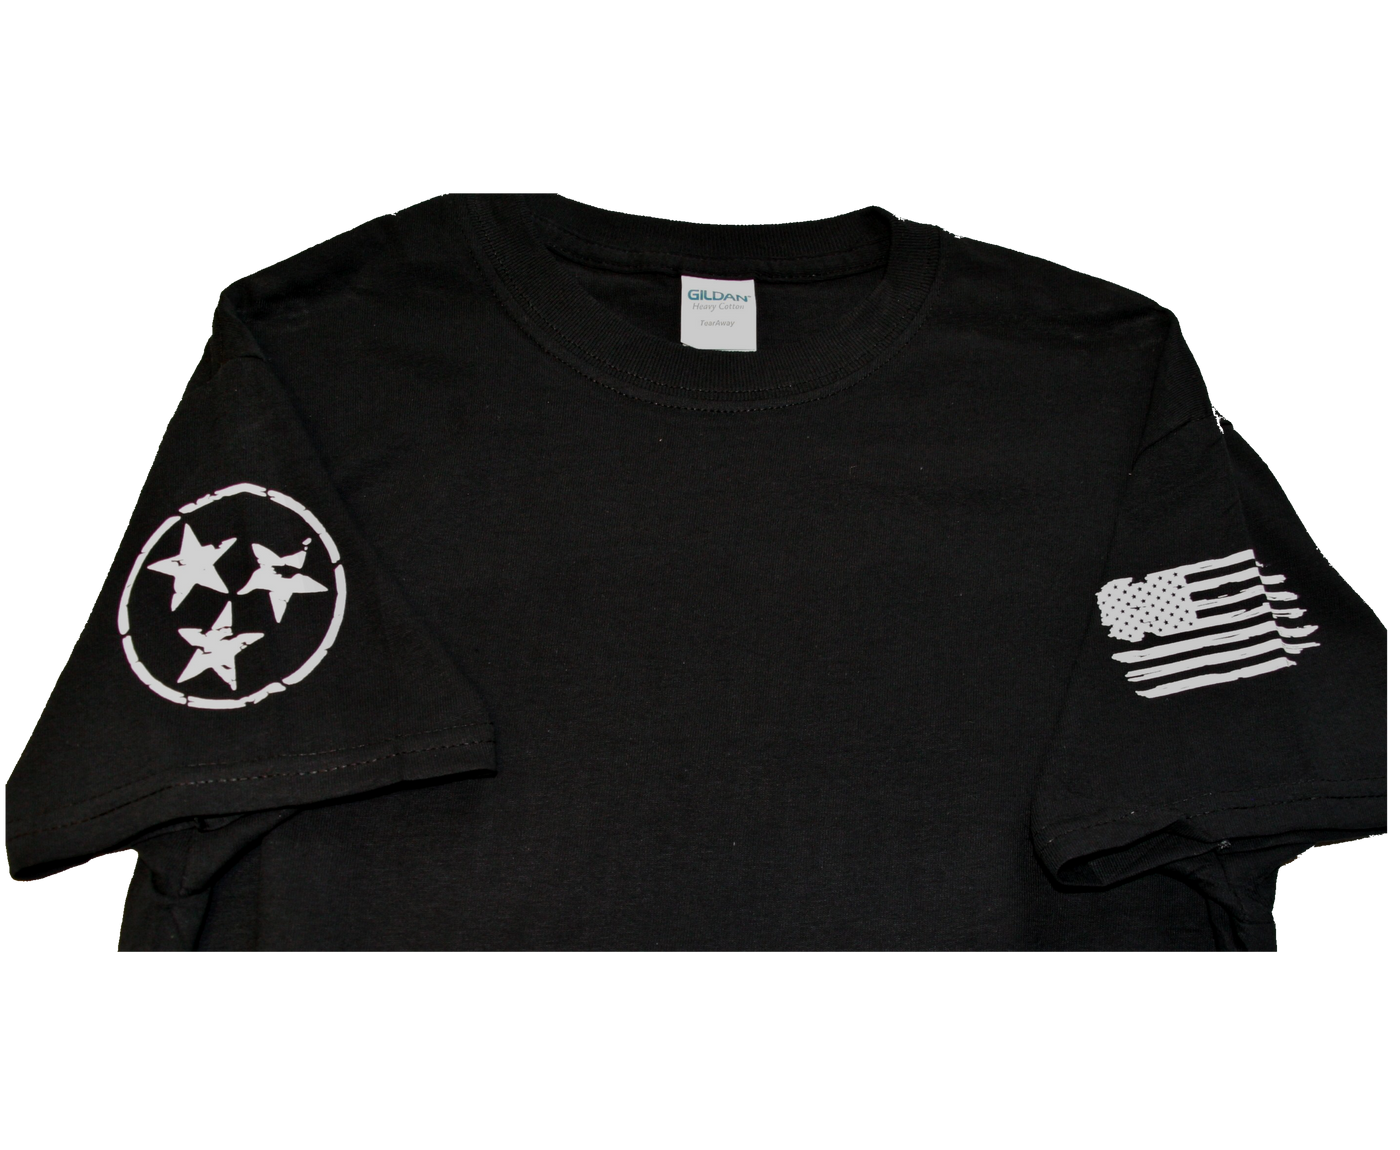 Buckle and Hide Leather T-shirt Heavy-weight Gildan brand t-shirt with round neckline Buckle and Hide Leather logo on the back only US flag design on one sleeve and Tennessee stars on other Available in sizes L-3xl